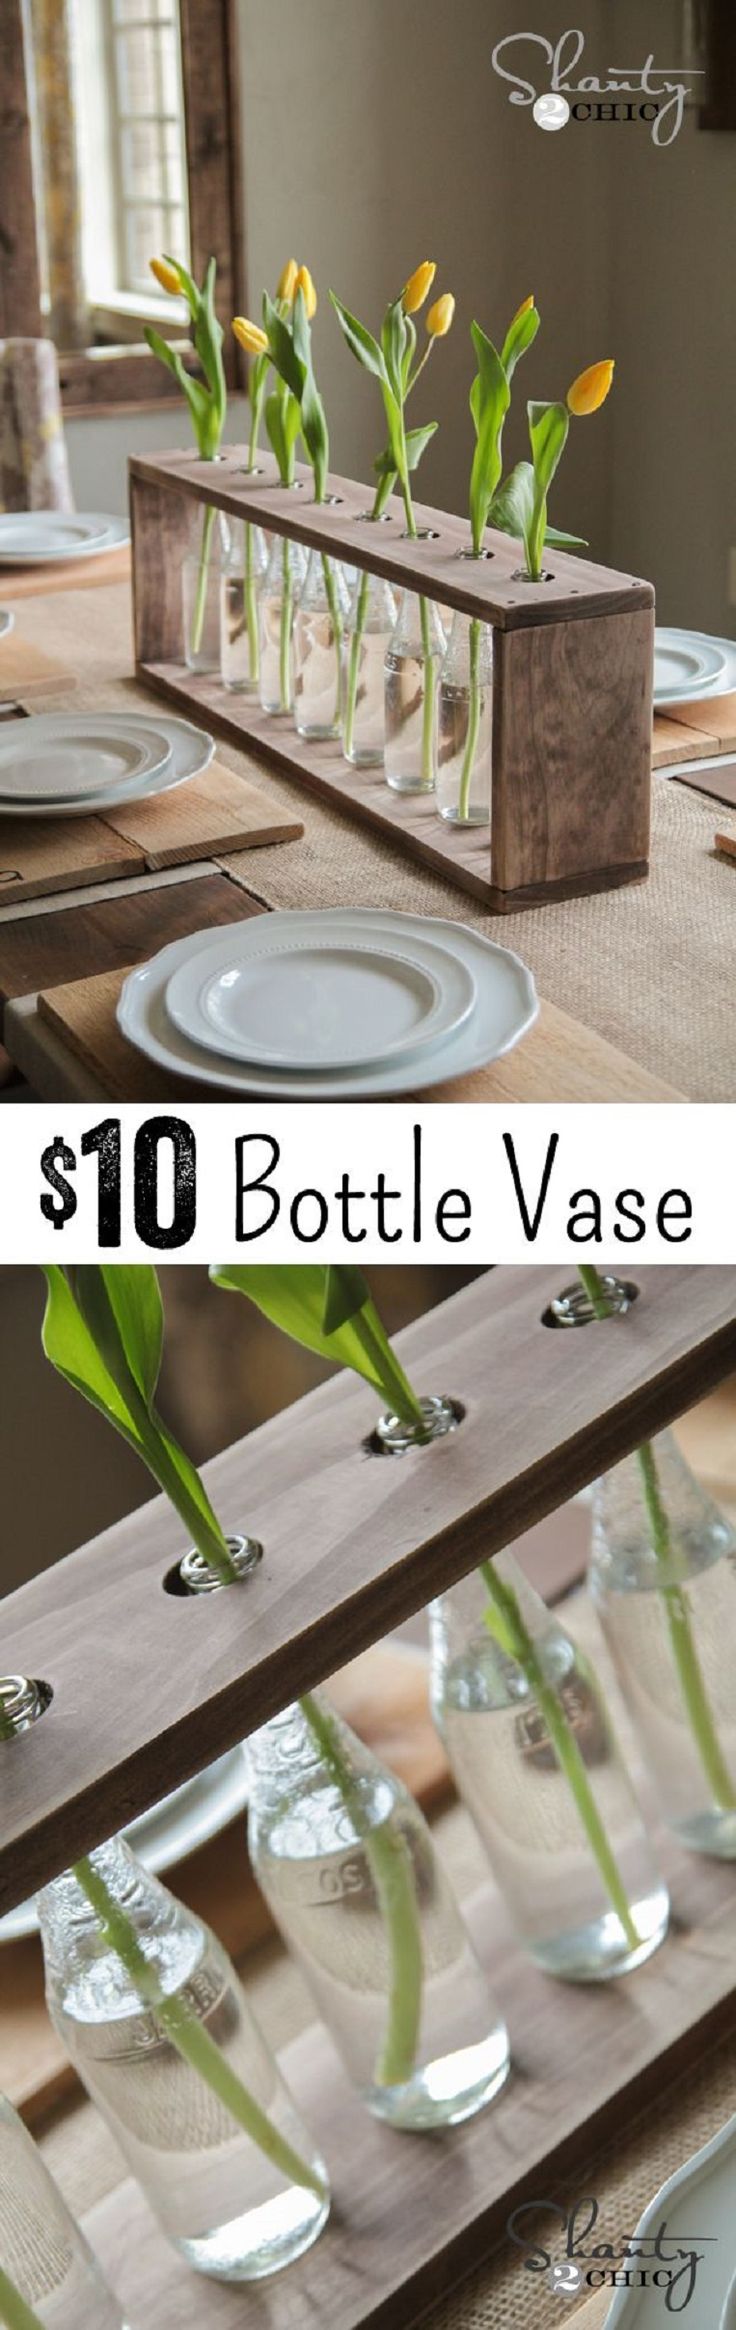 Turn a few bottles into some unique vases for your flowers.